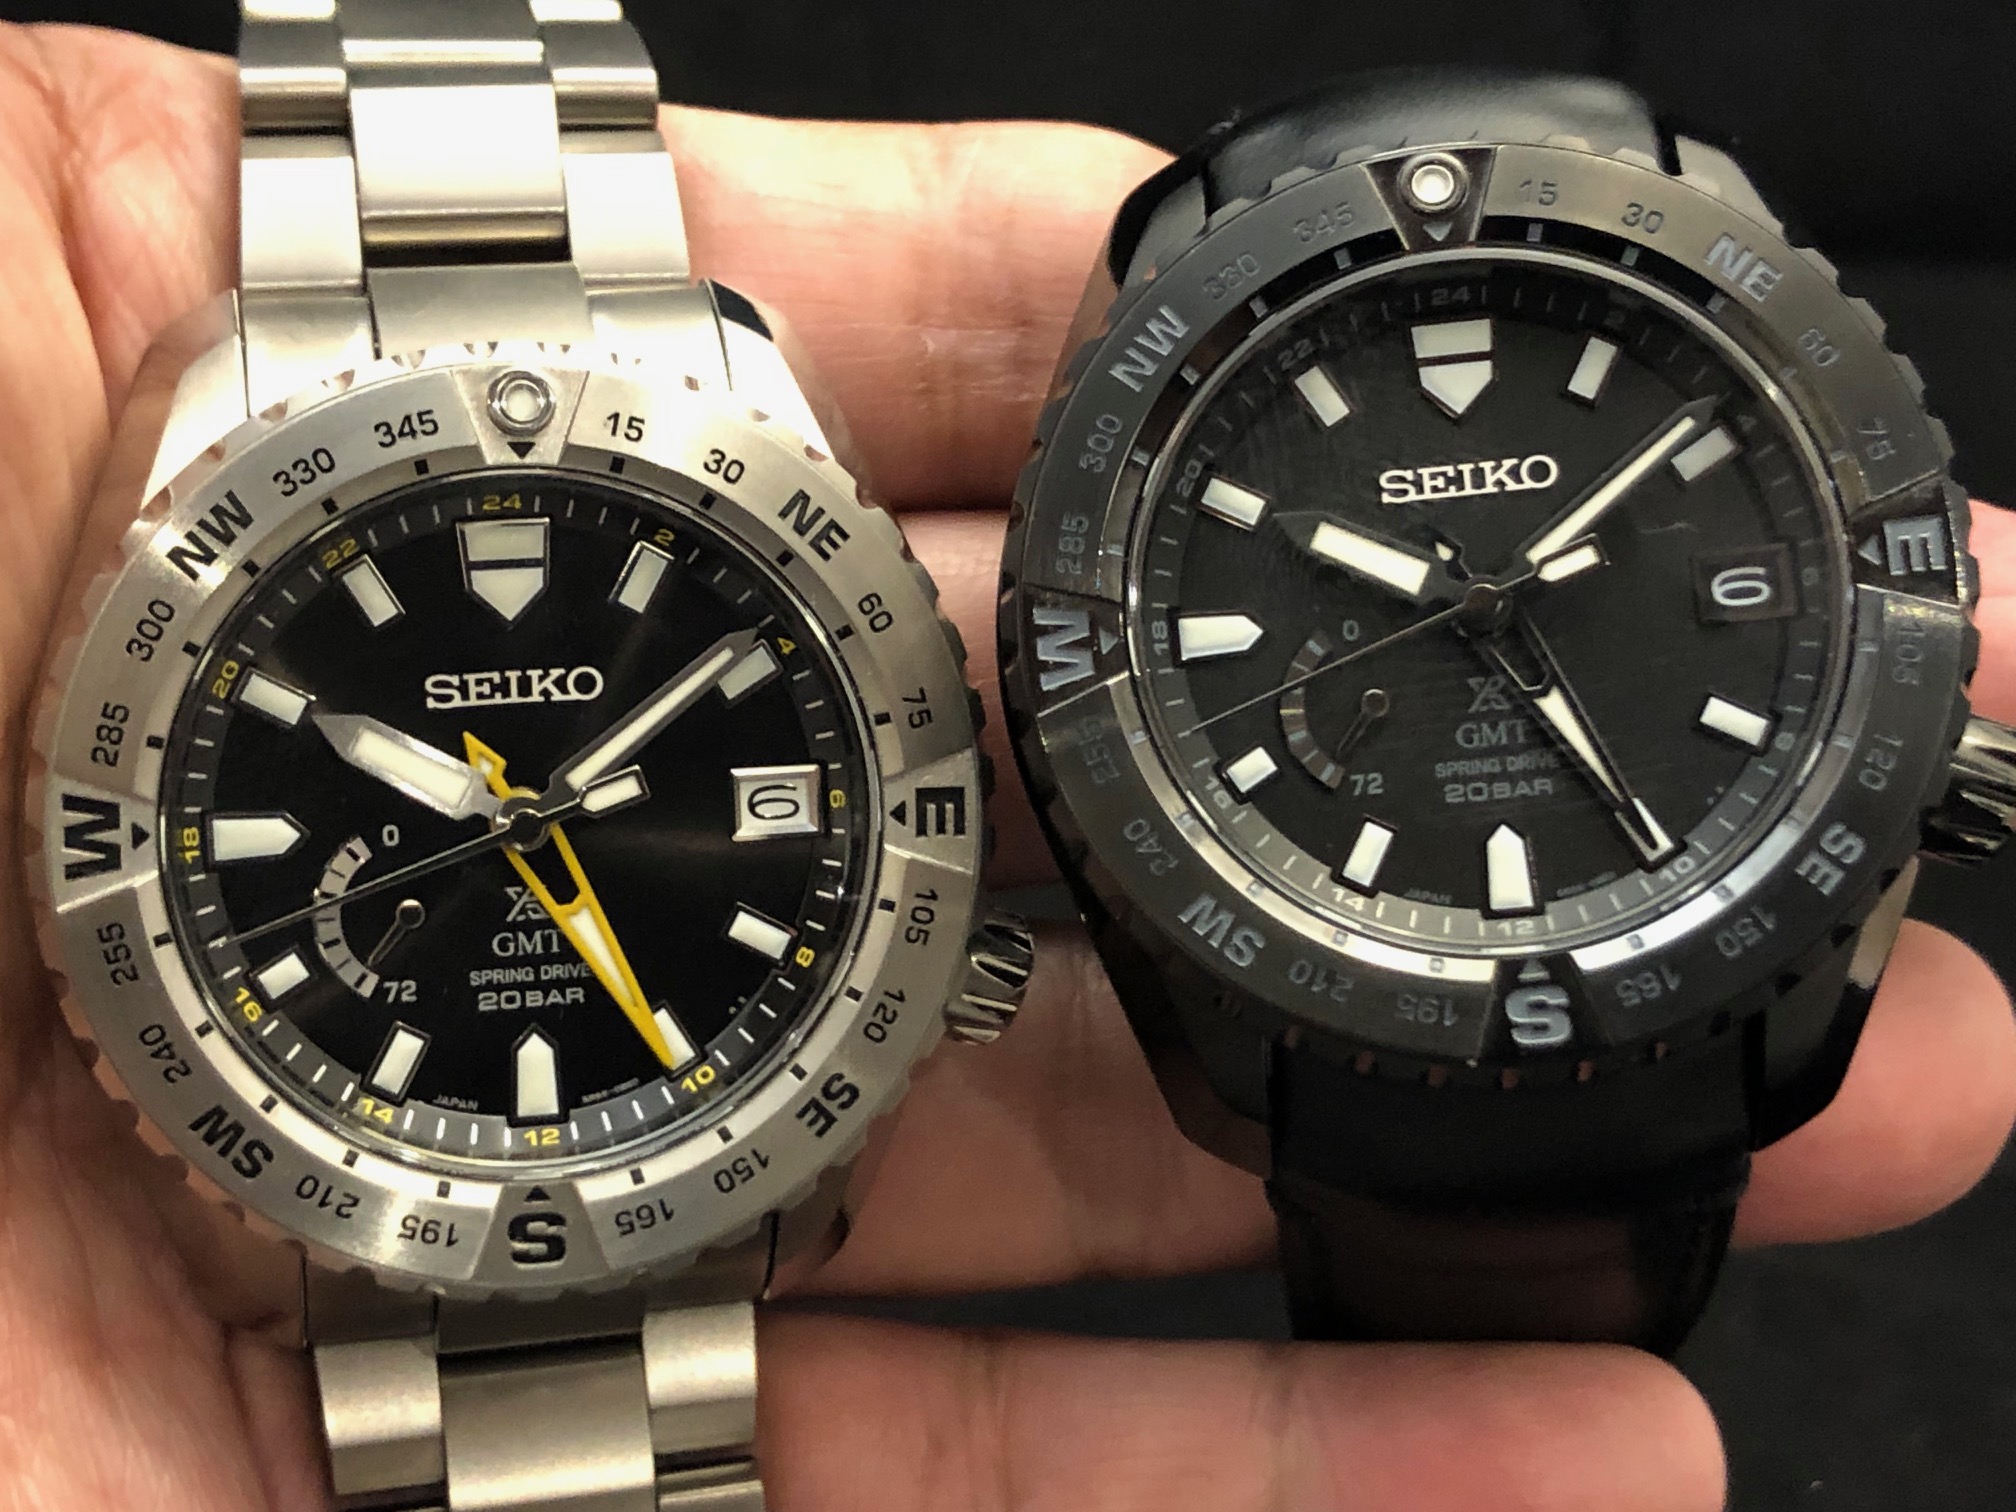 Live from Baselworld 2019: Seiko